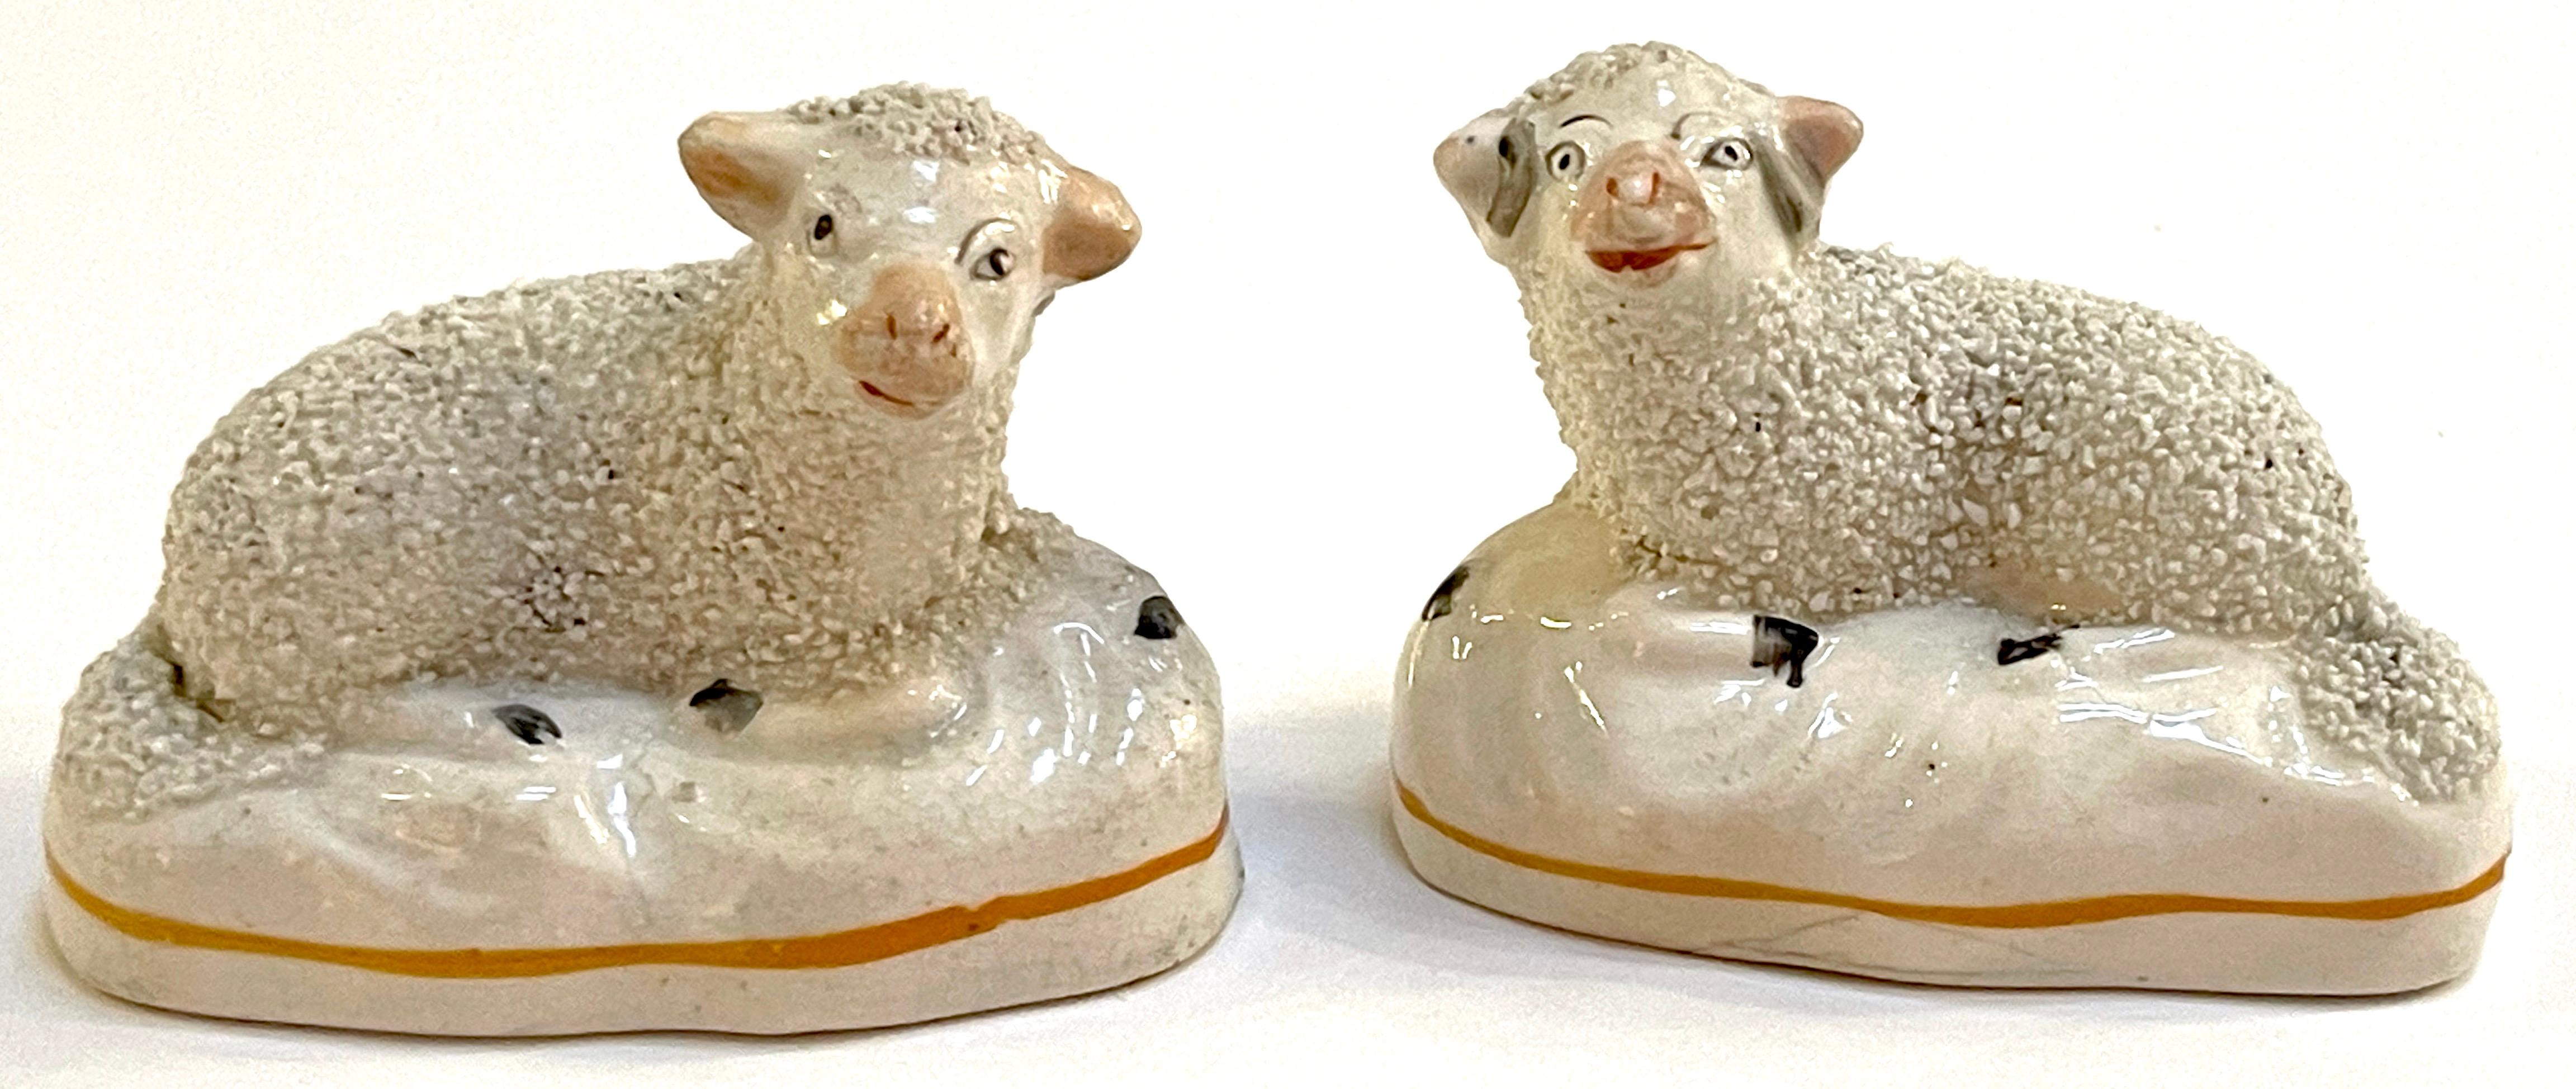 Pair of 19th century Staffordshire figures of Recumbent Sheep.
England, circa 1860s.

A diminutive pair of expressive pair of Staffordshire pottery sheep with textured bodies. Some firing lines, structurally sound.